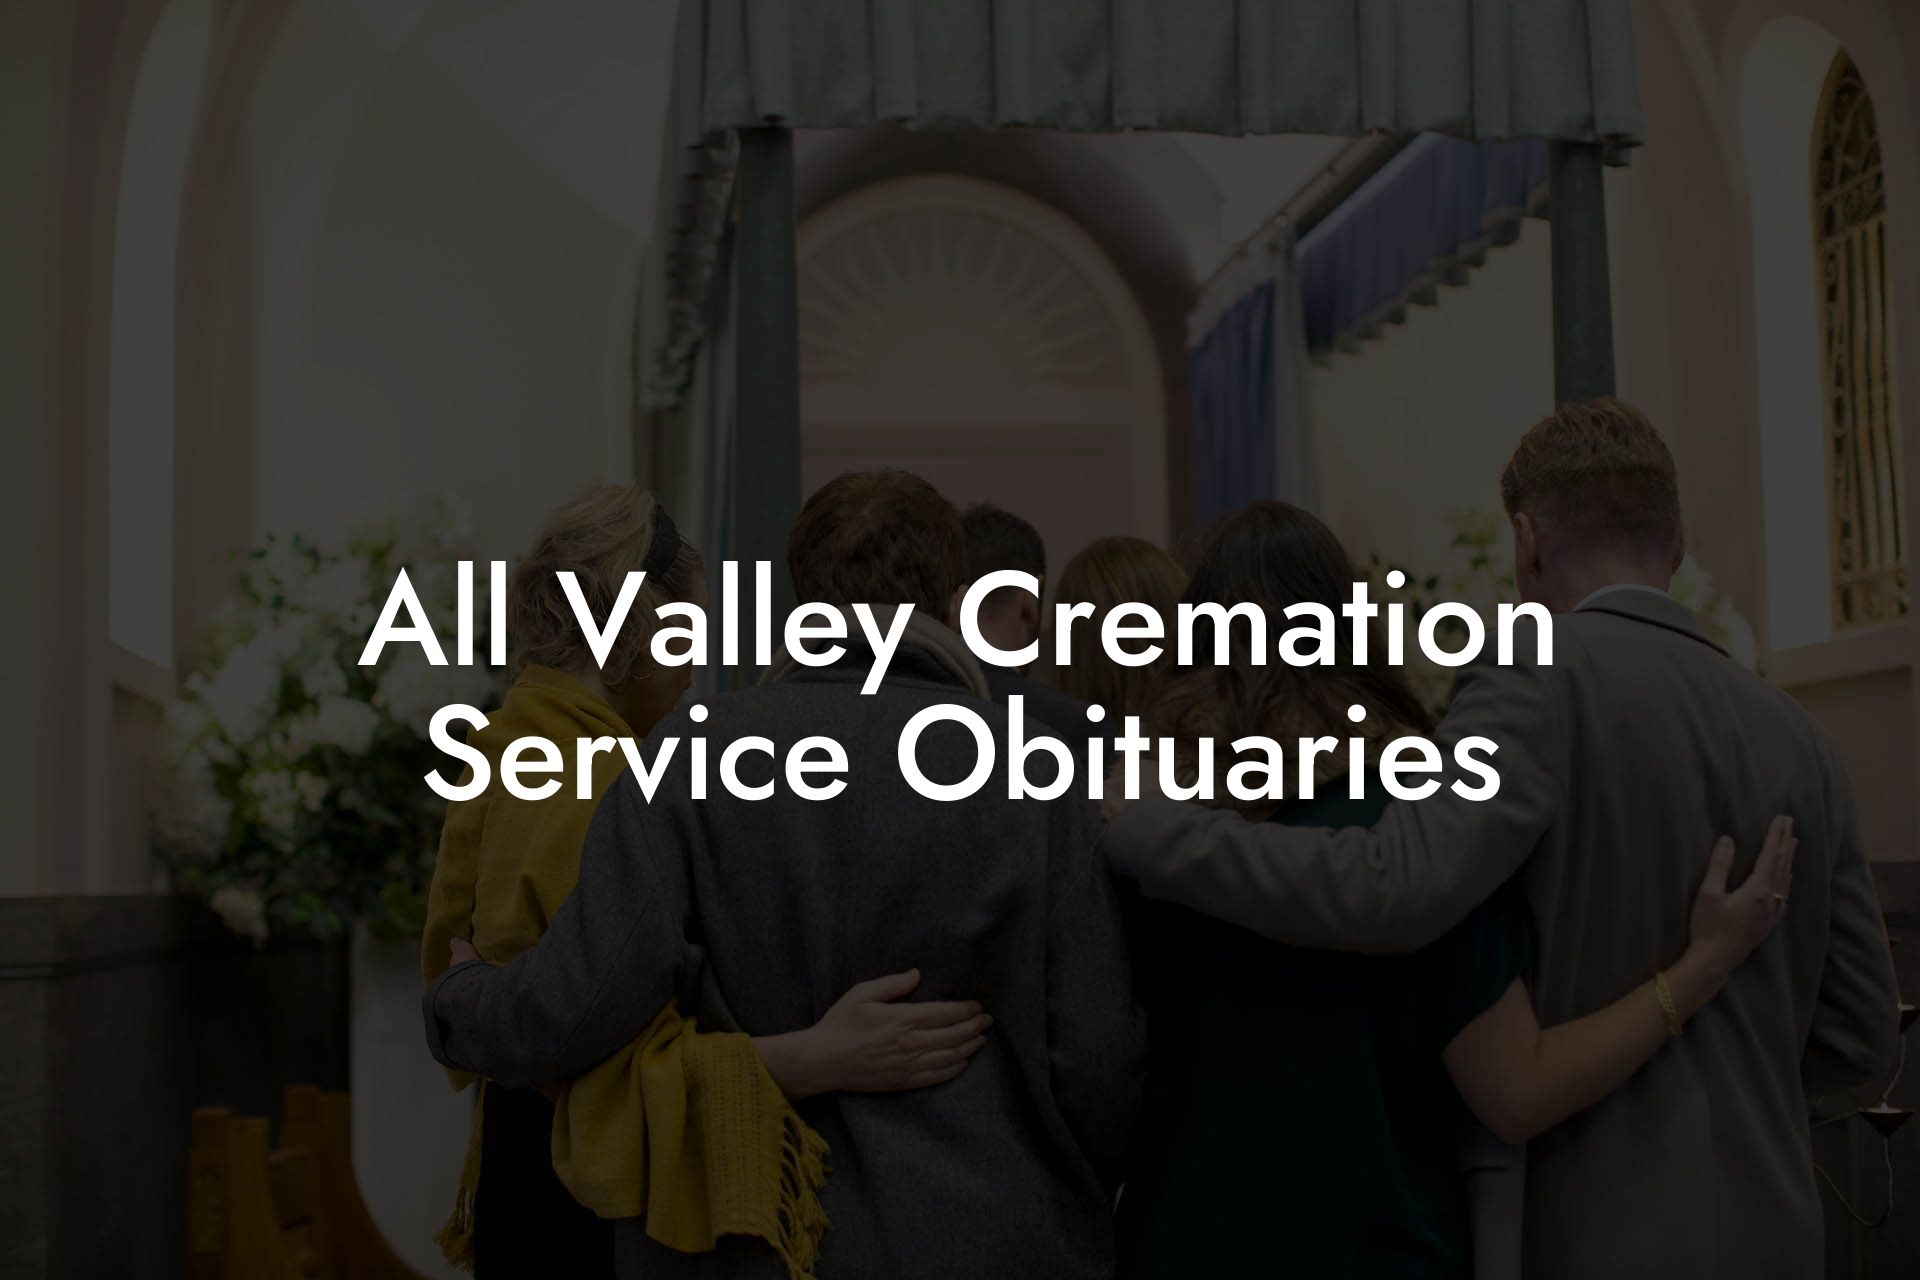 All Valley Cremation Service Obituaries